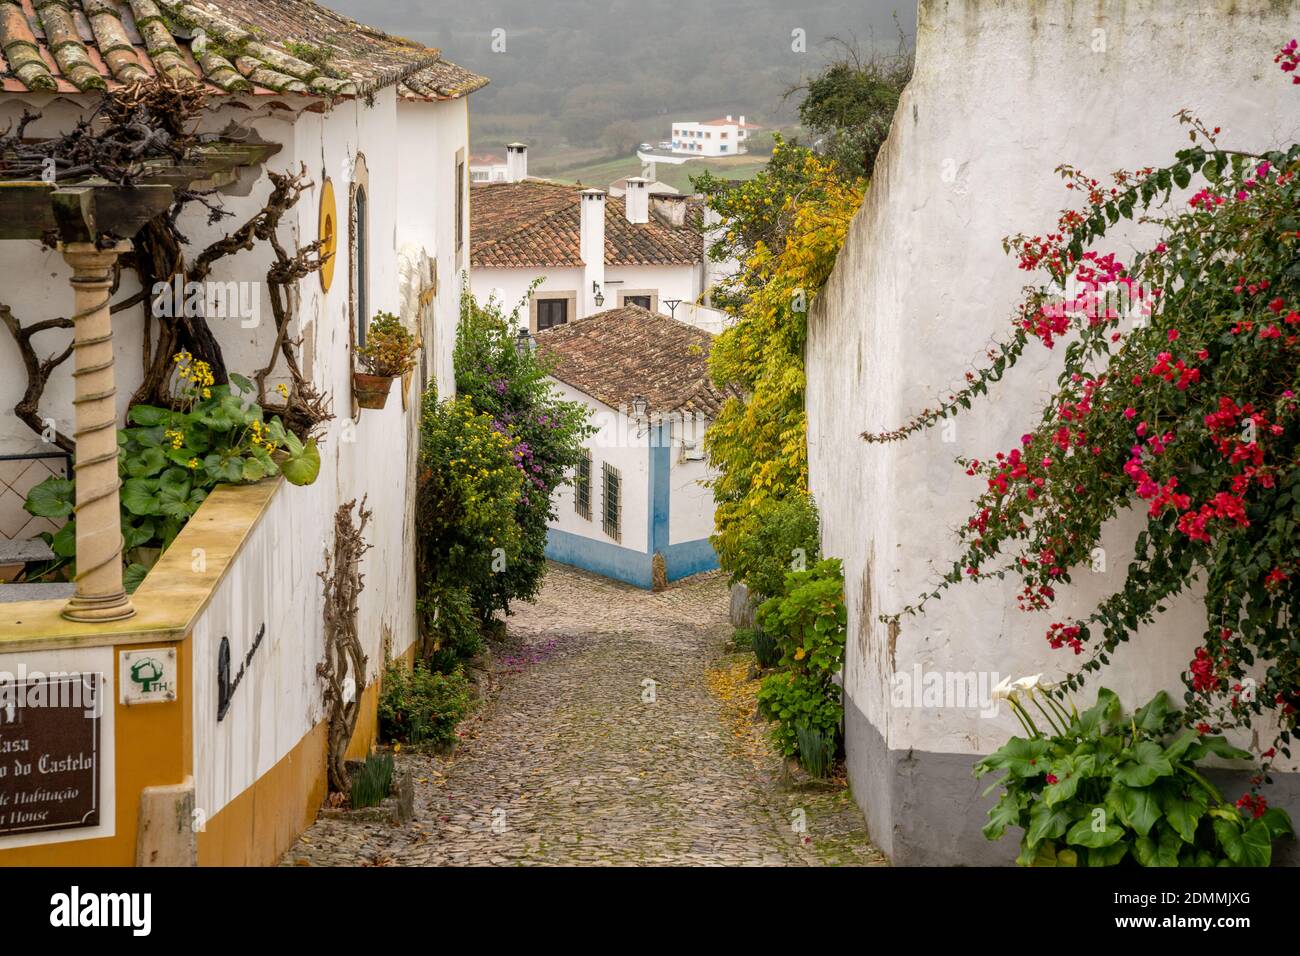 Obidos, Portugal - 13 December 2020: the picturesque houses and narrow streets in Obidos in Portugal Stock Photo